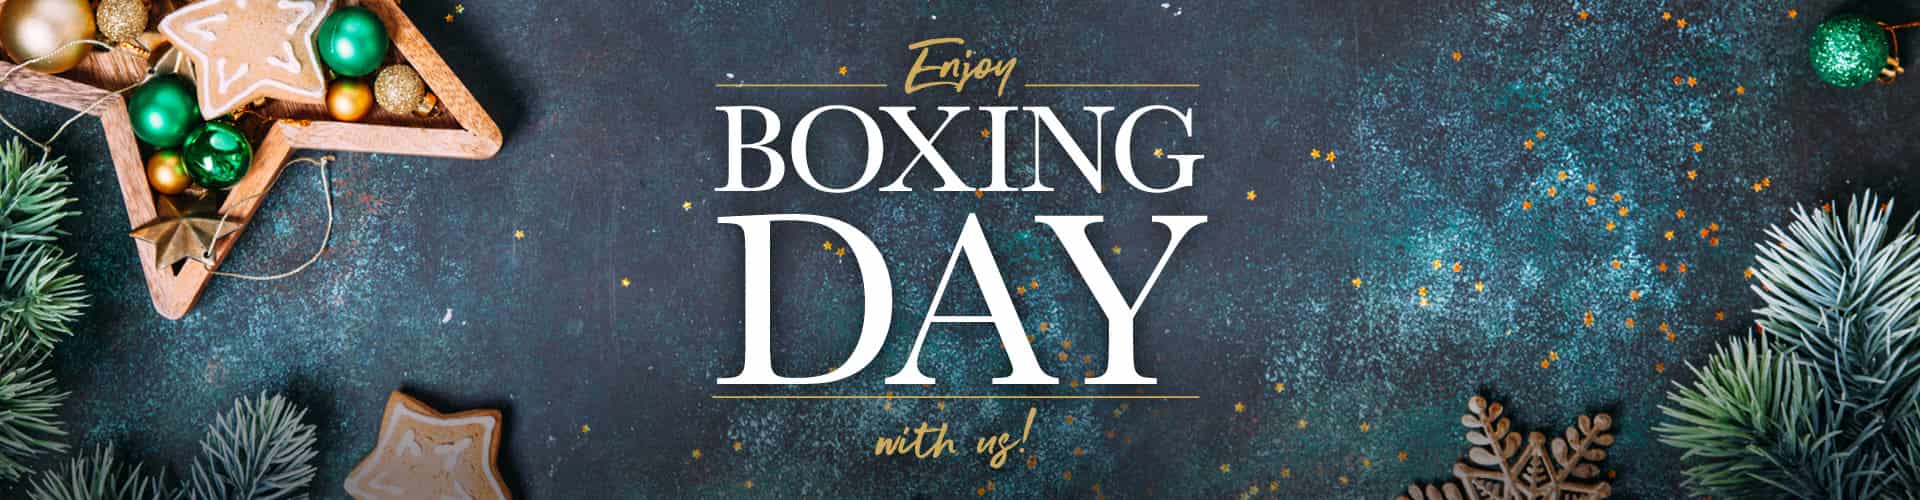 Enjoy Boxing Day with us at Prince Of Wales